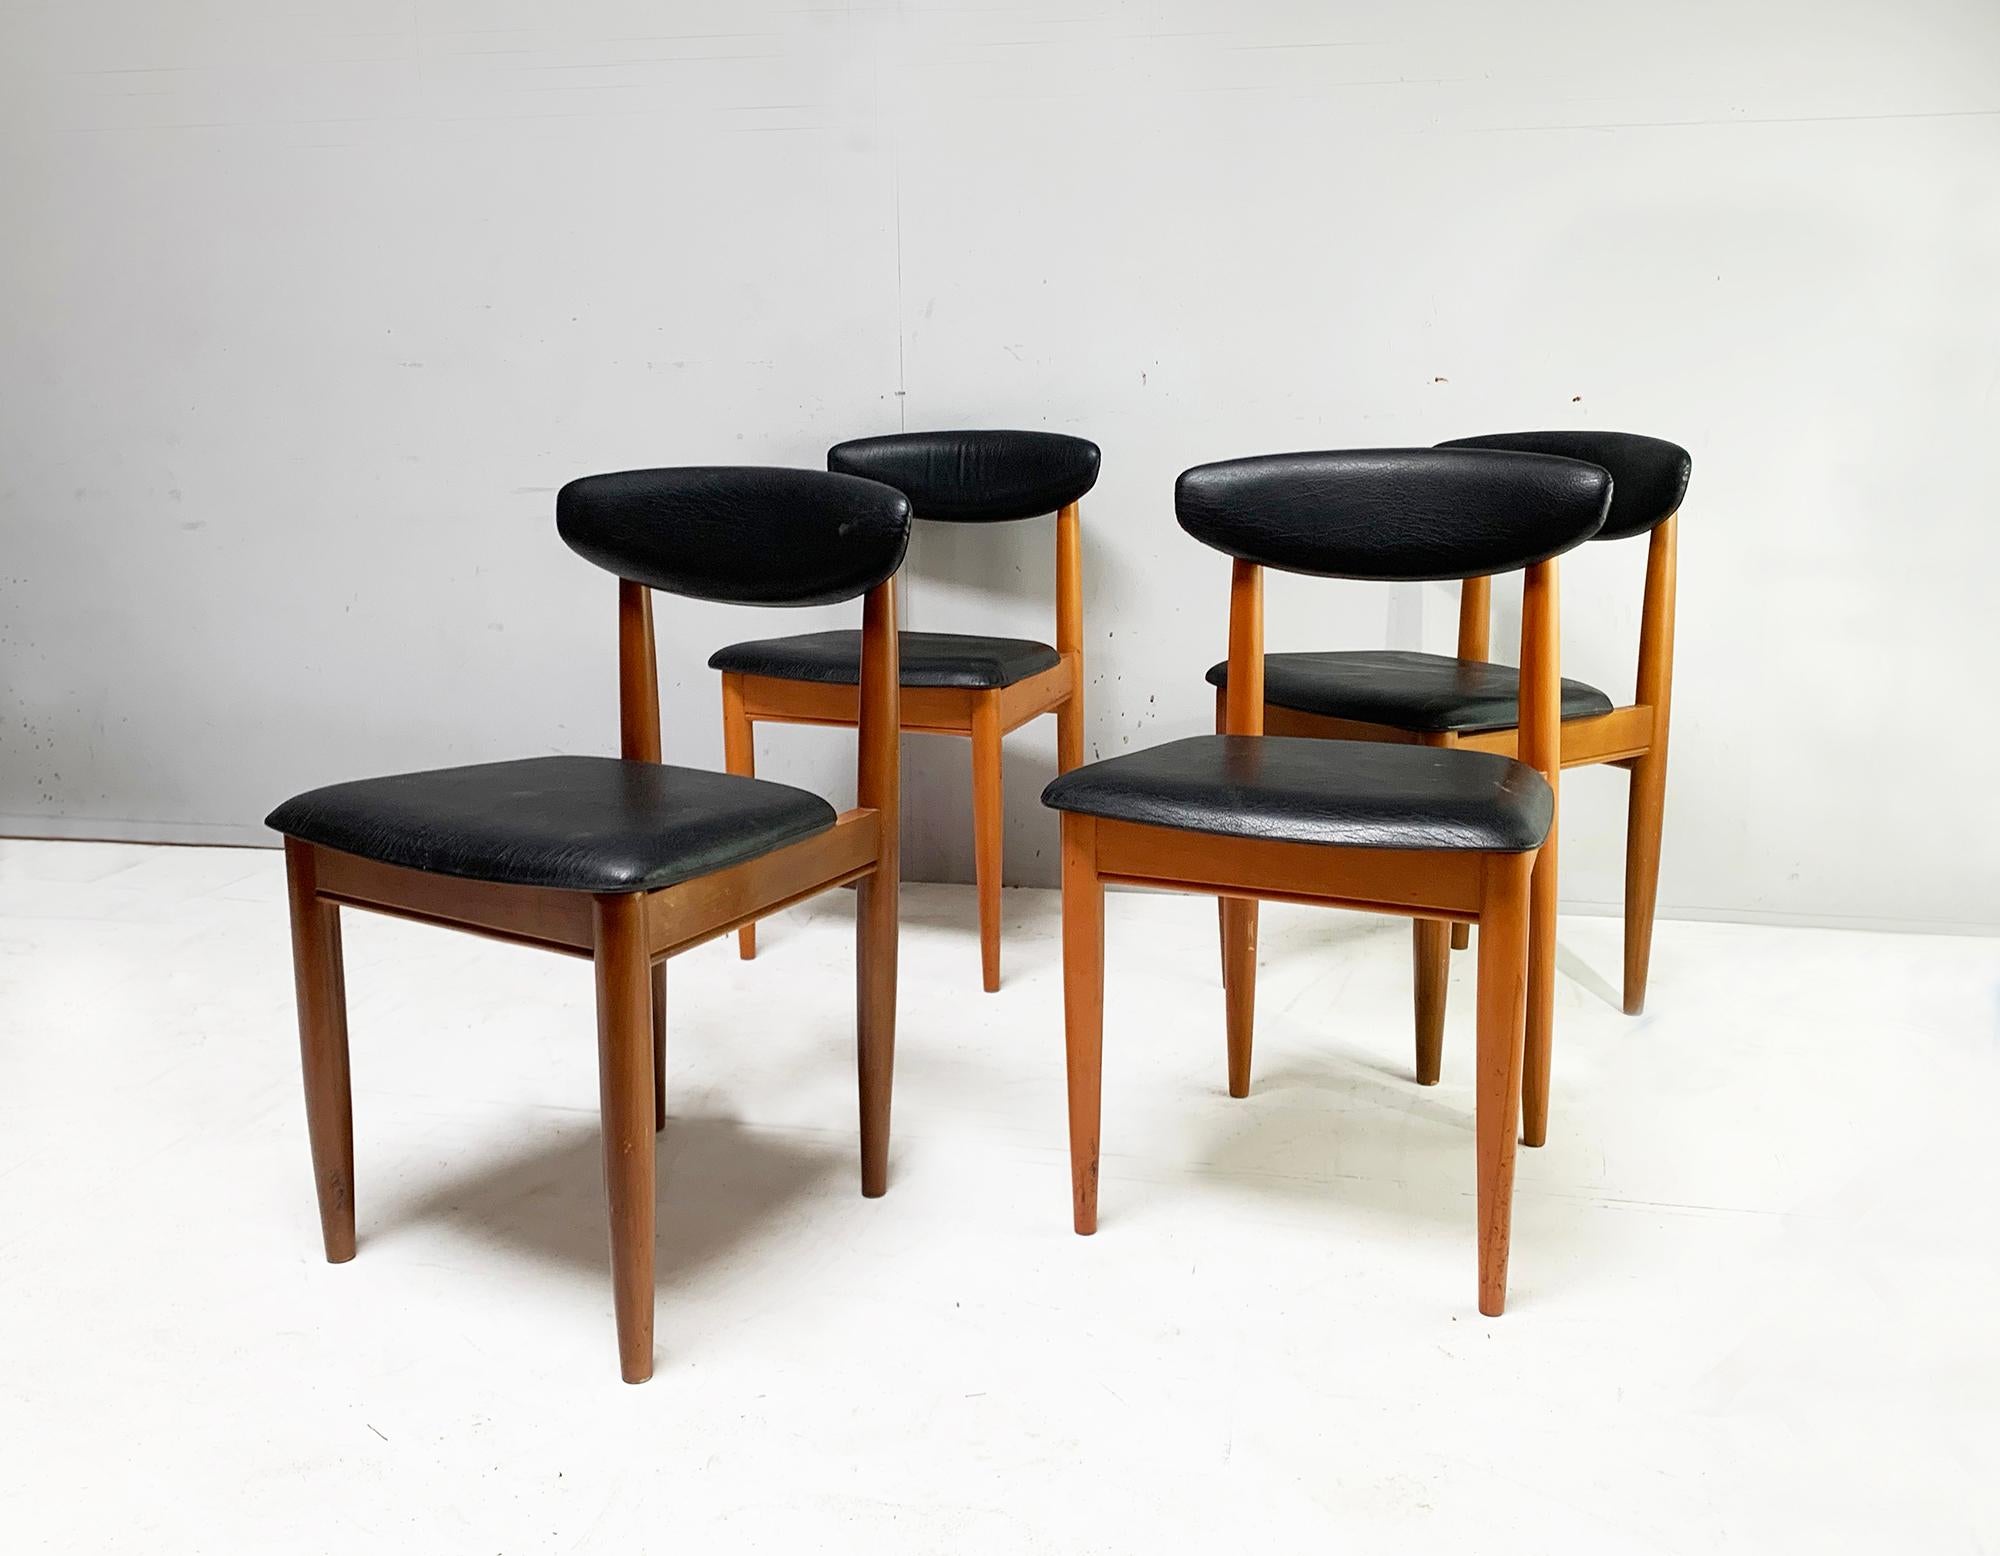 The price listed is for the FOUR chairs

Founded in 1957 by Chaim Schreiber, Schreiber furniture is an interesting British success story. The Company was one of the biggest names in furniture in the 70s, rivalling G Plan and other well known